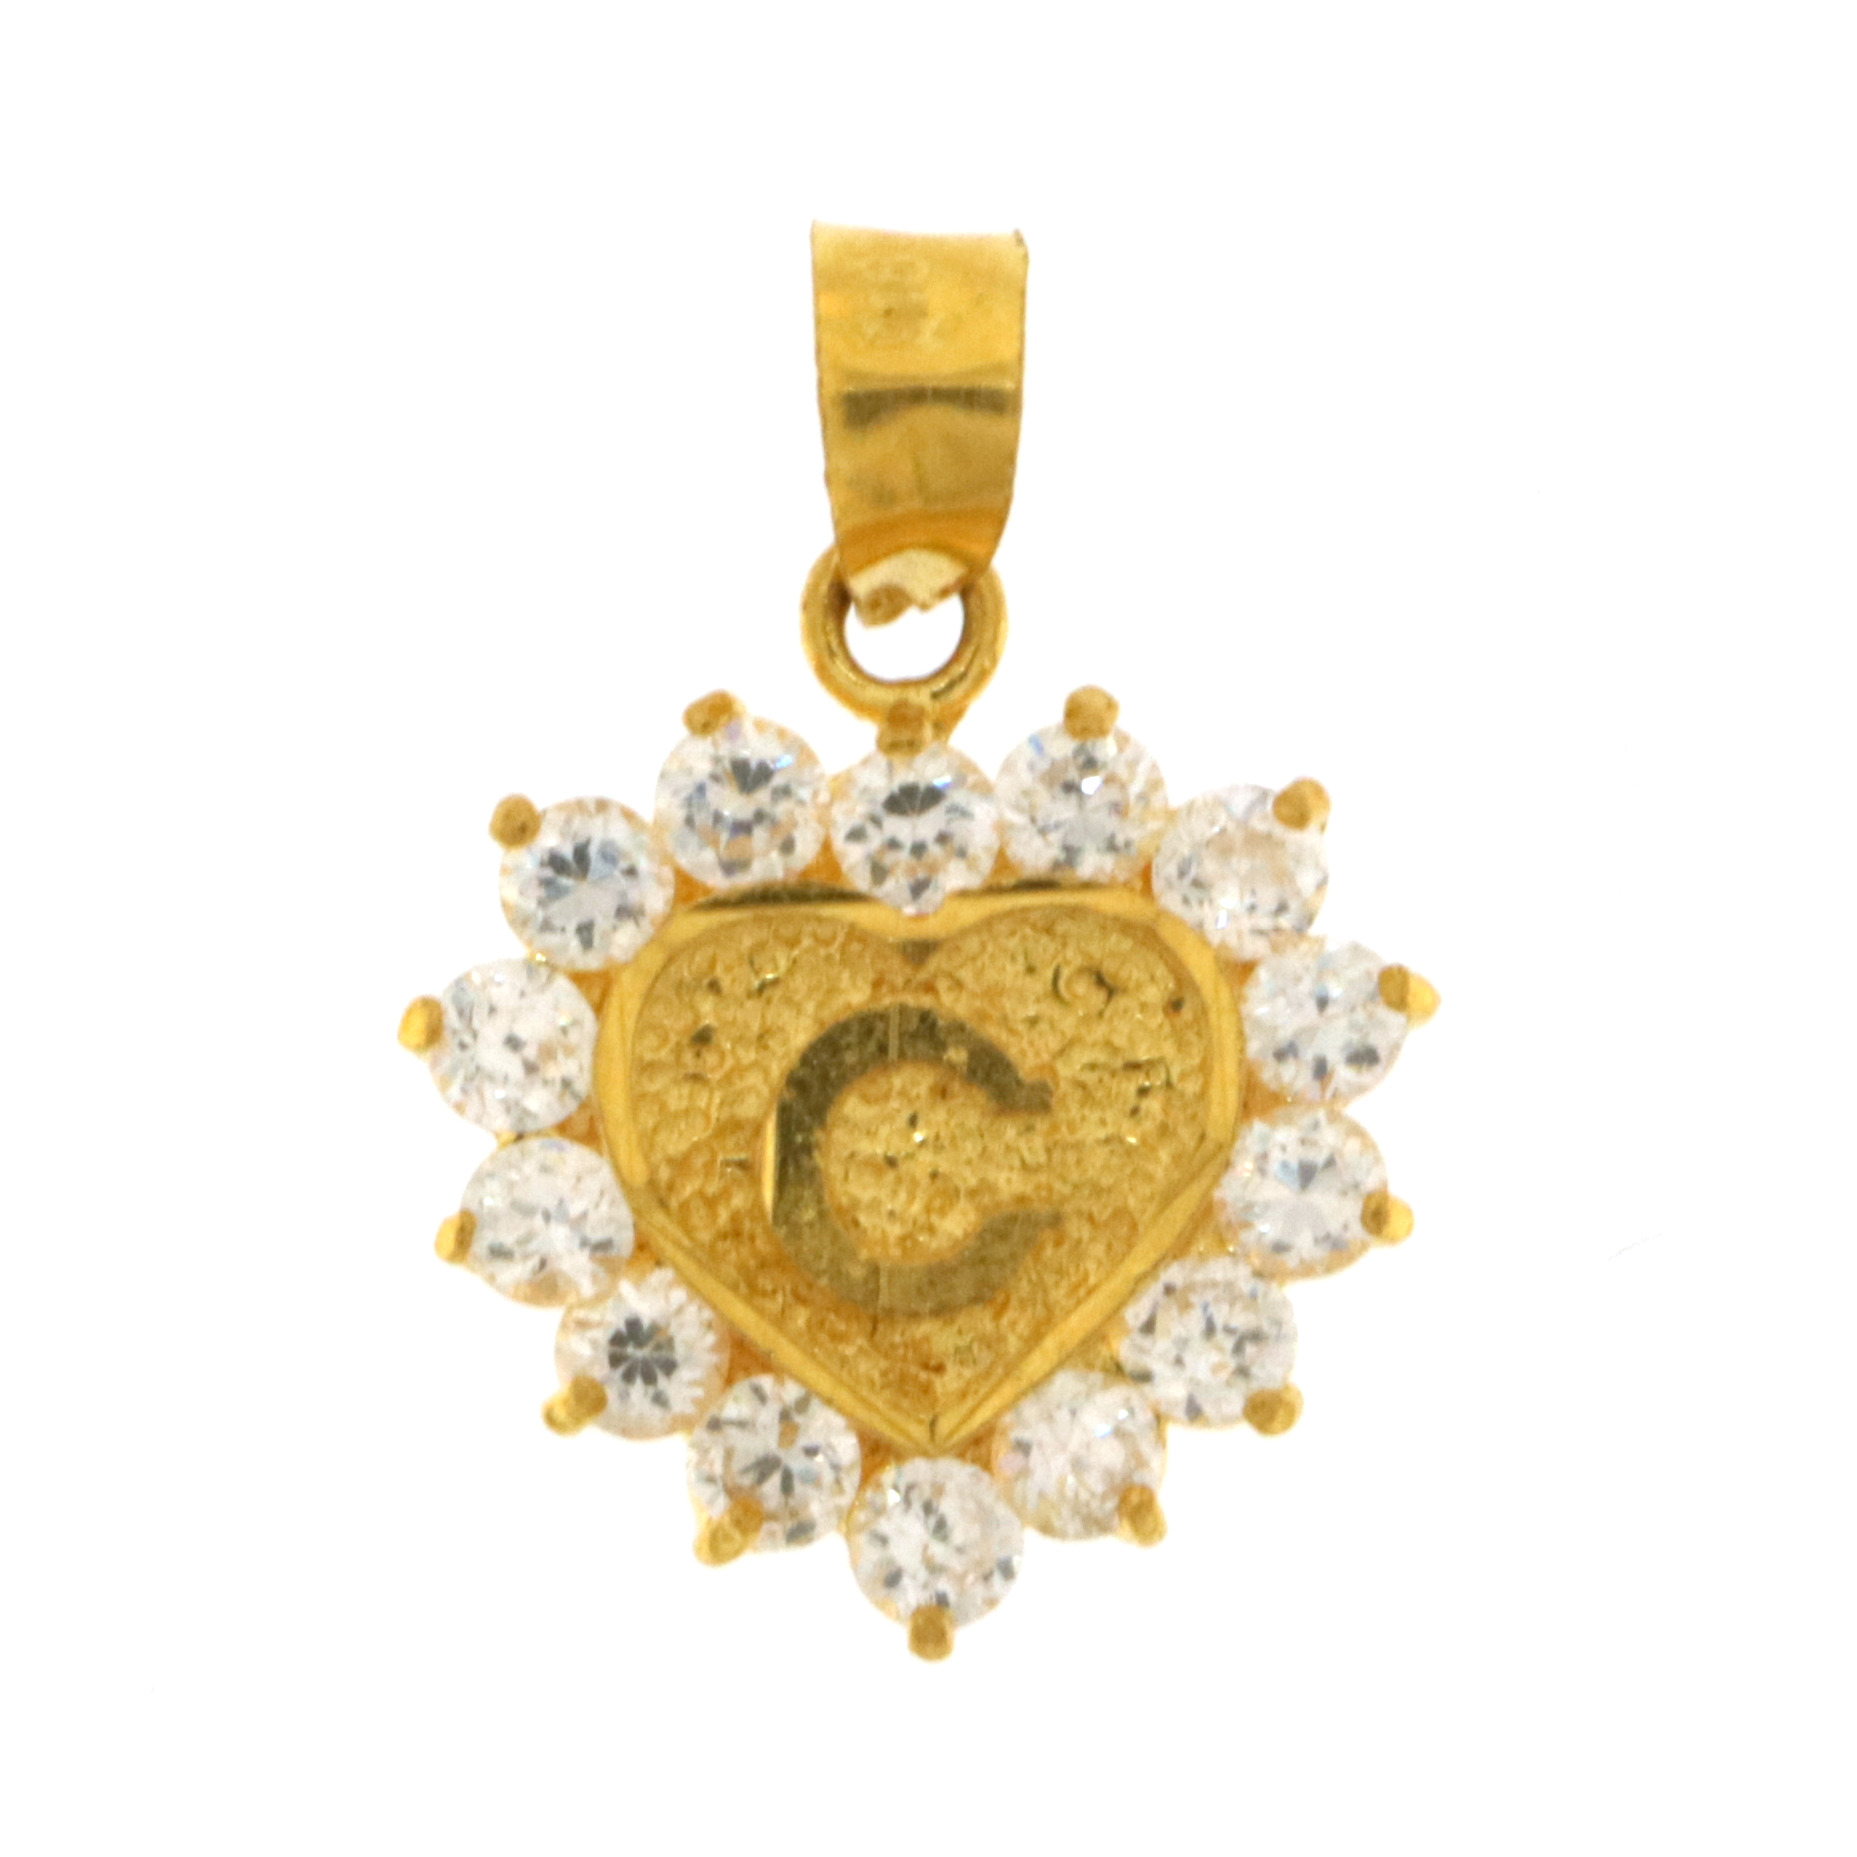 22ct Real Gold Asian/Indian/Pakistani Style 'C' Heart Pendant